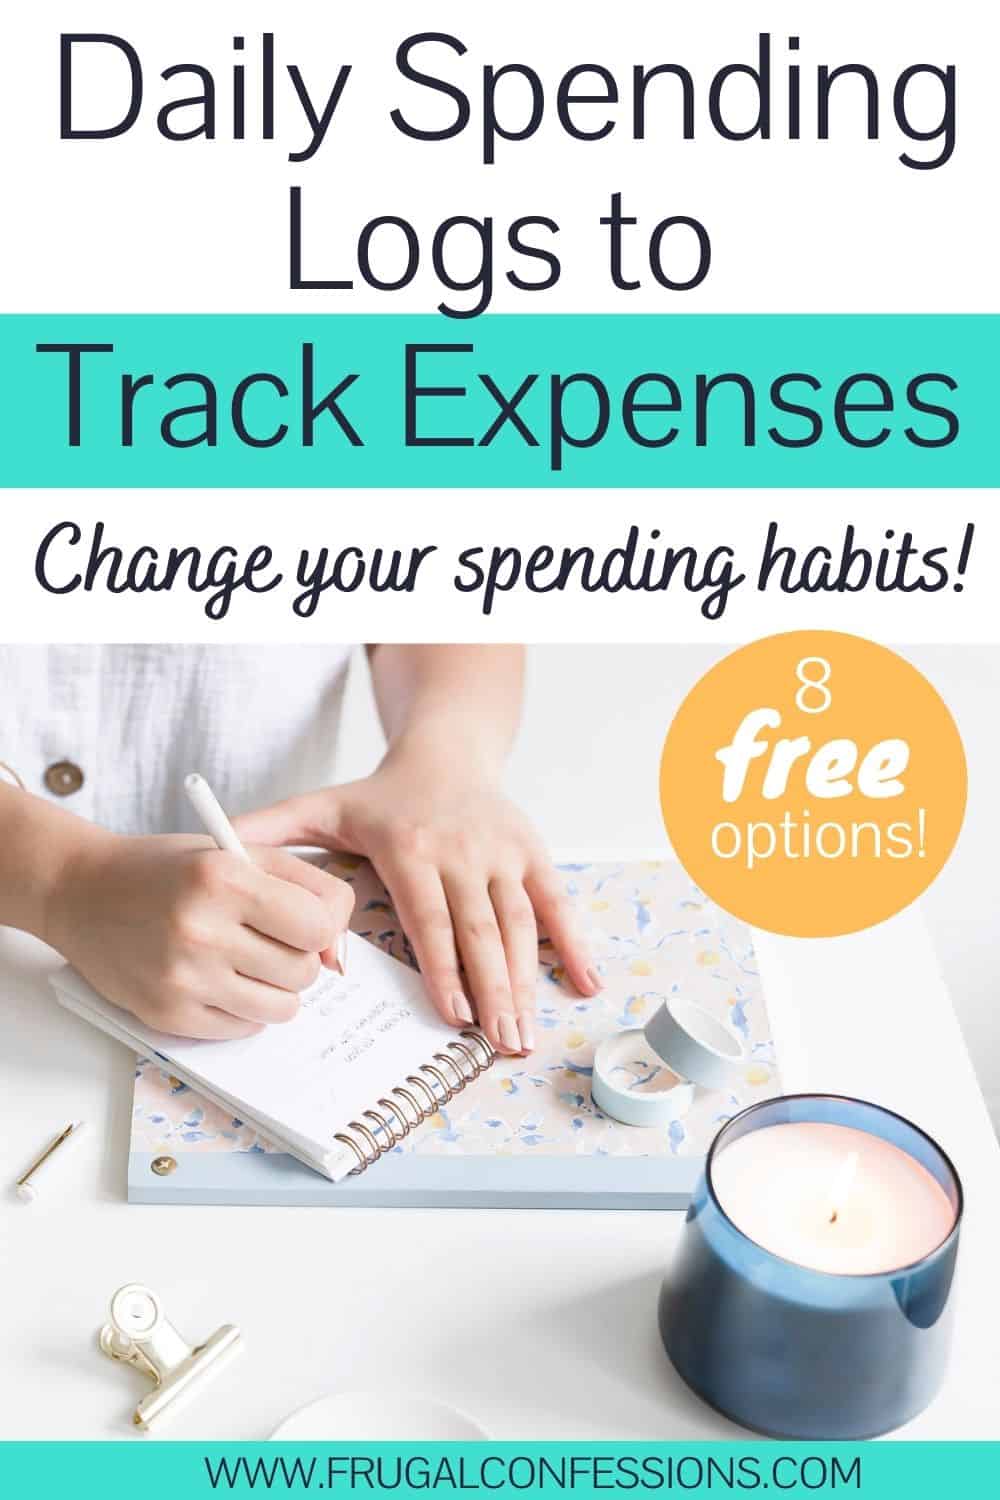 woman writing on spending log, text overlay "daily spending logs to track expenses - change your spending habits!"